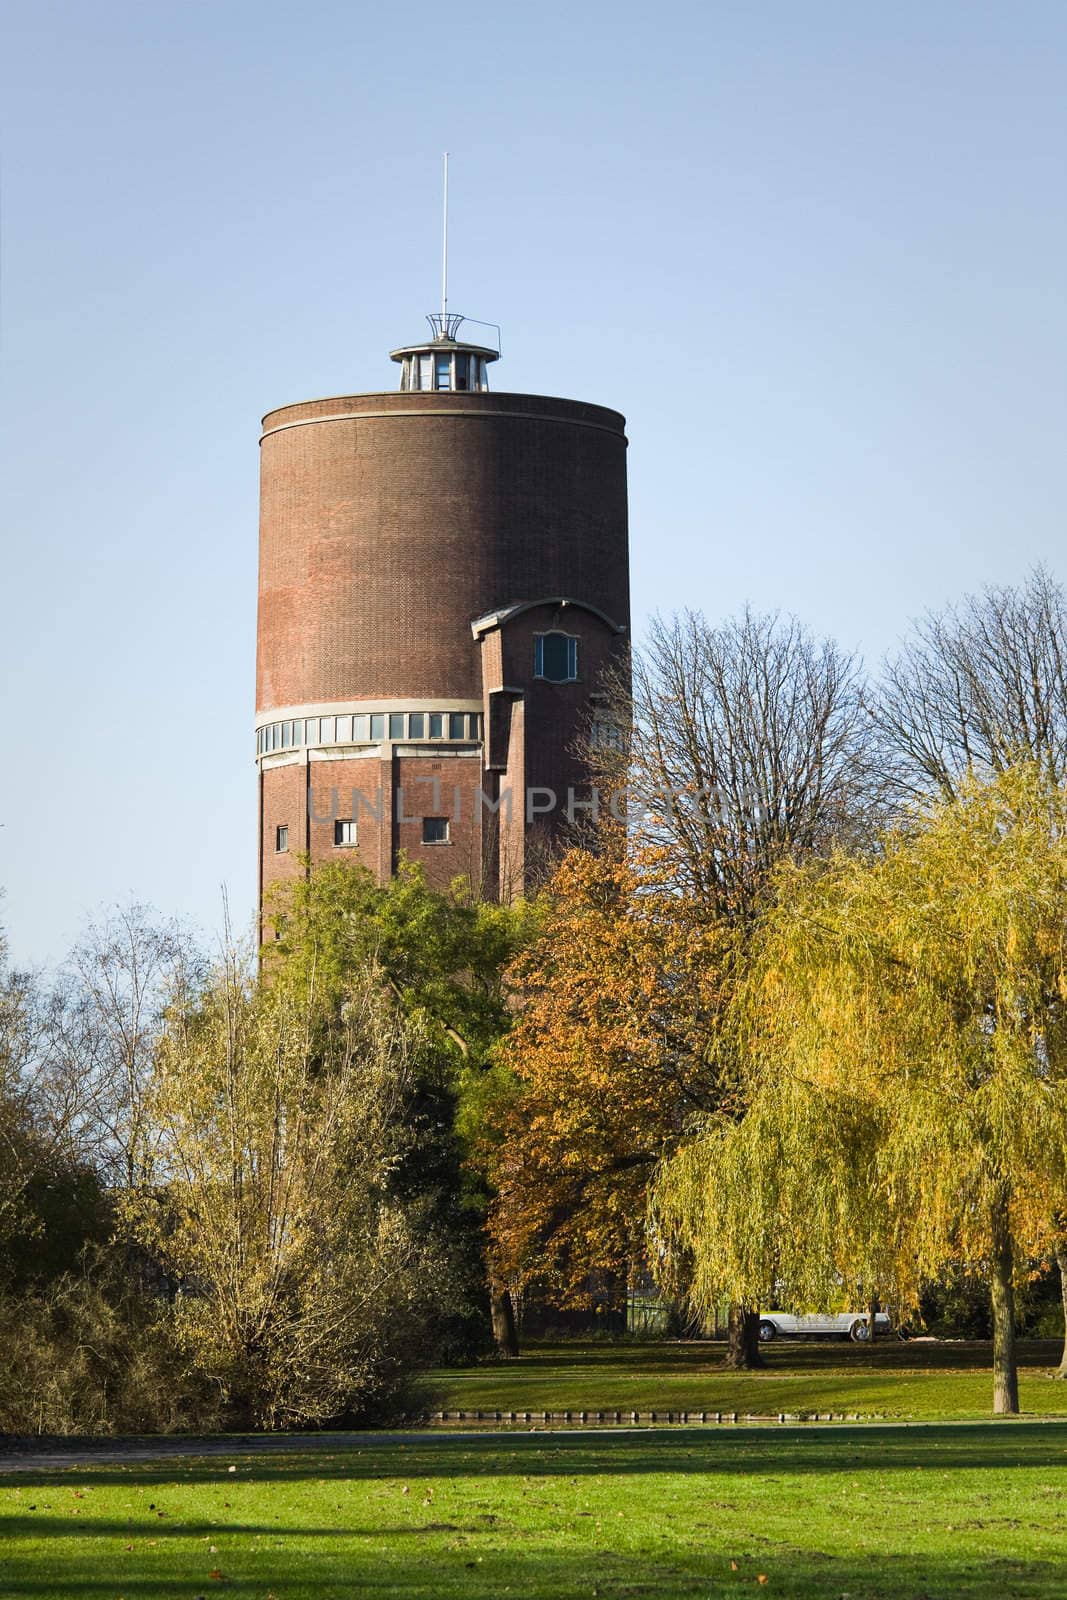 Park with old water tower in fall with colorful trees and blue sky